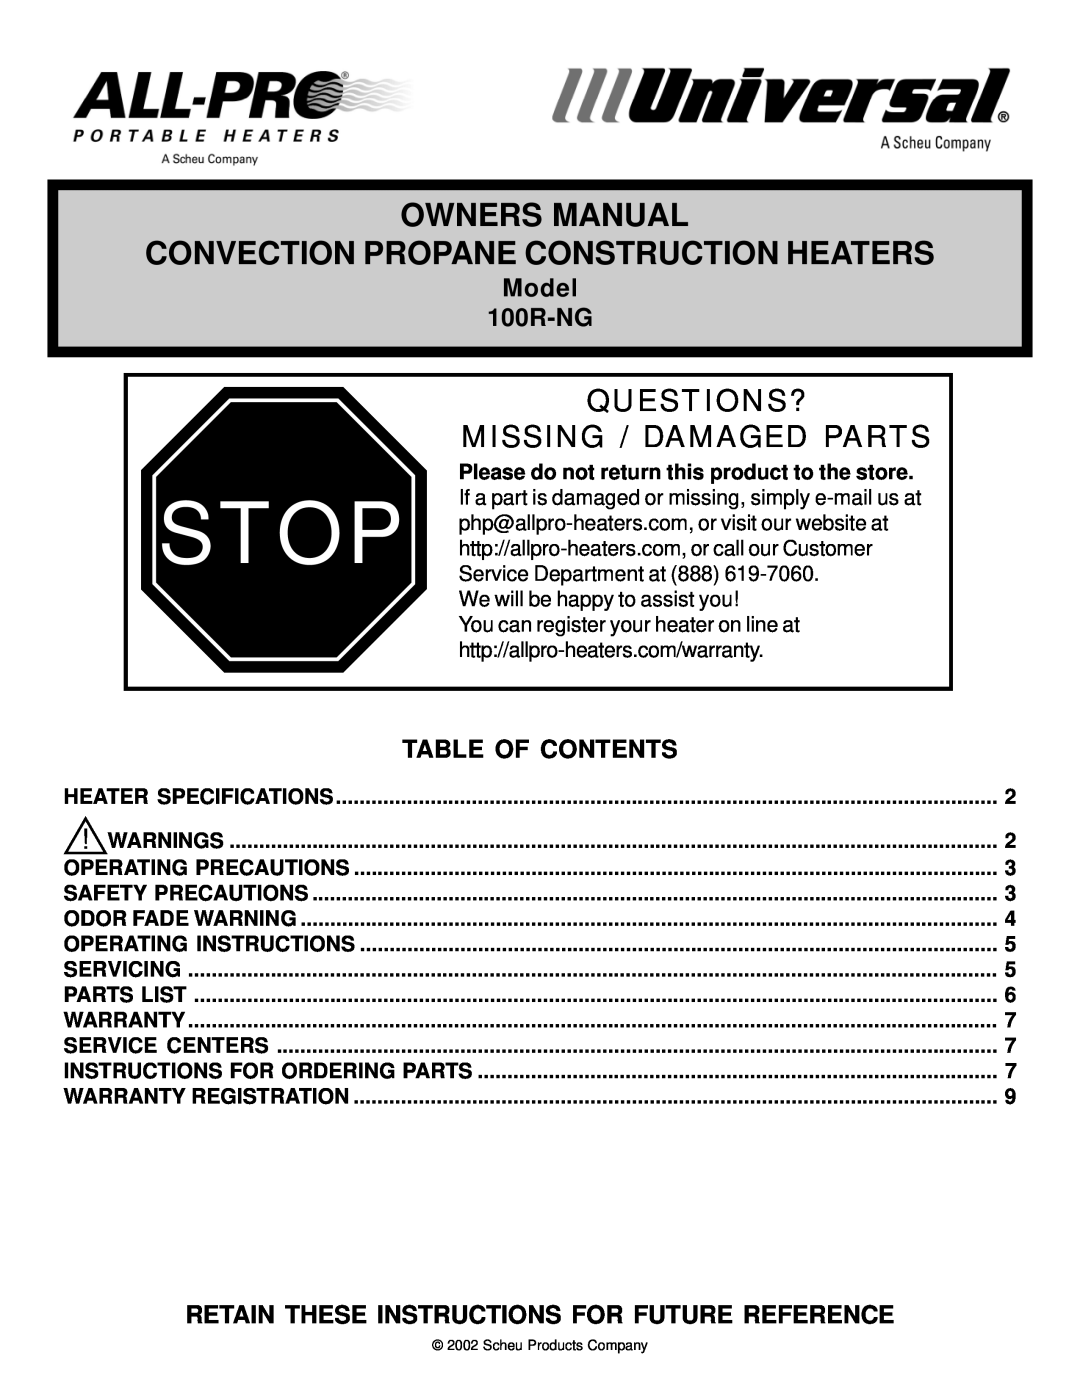 Universal owner manual Model 100R-NG, Table Of Contents, Retain These Instructions For Future Reference 